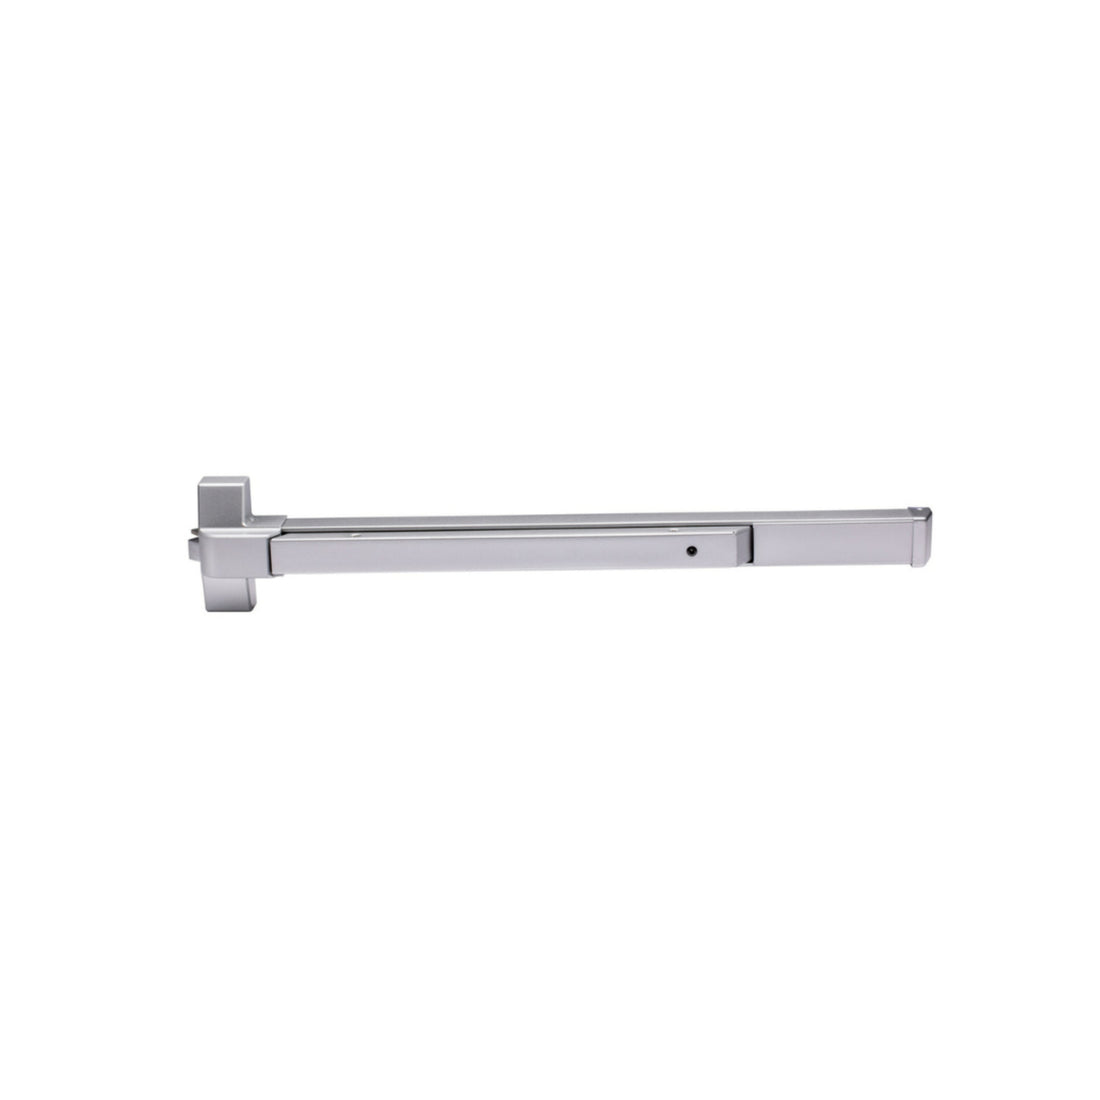 EDTBAR Series Grade 2 Commercial 36 in Fire Rated Rim Touch Bar Exit Device